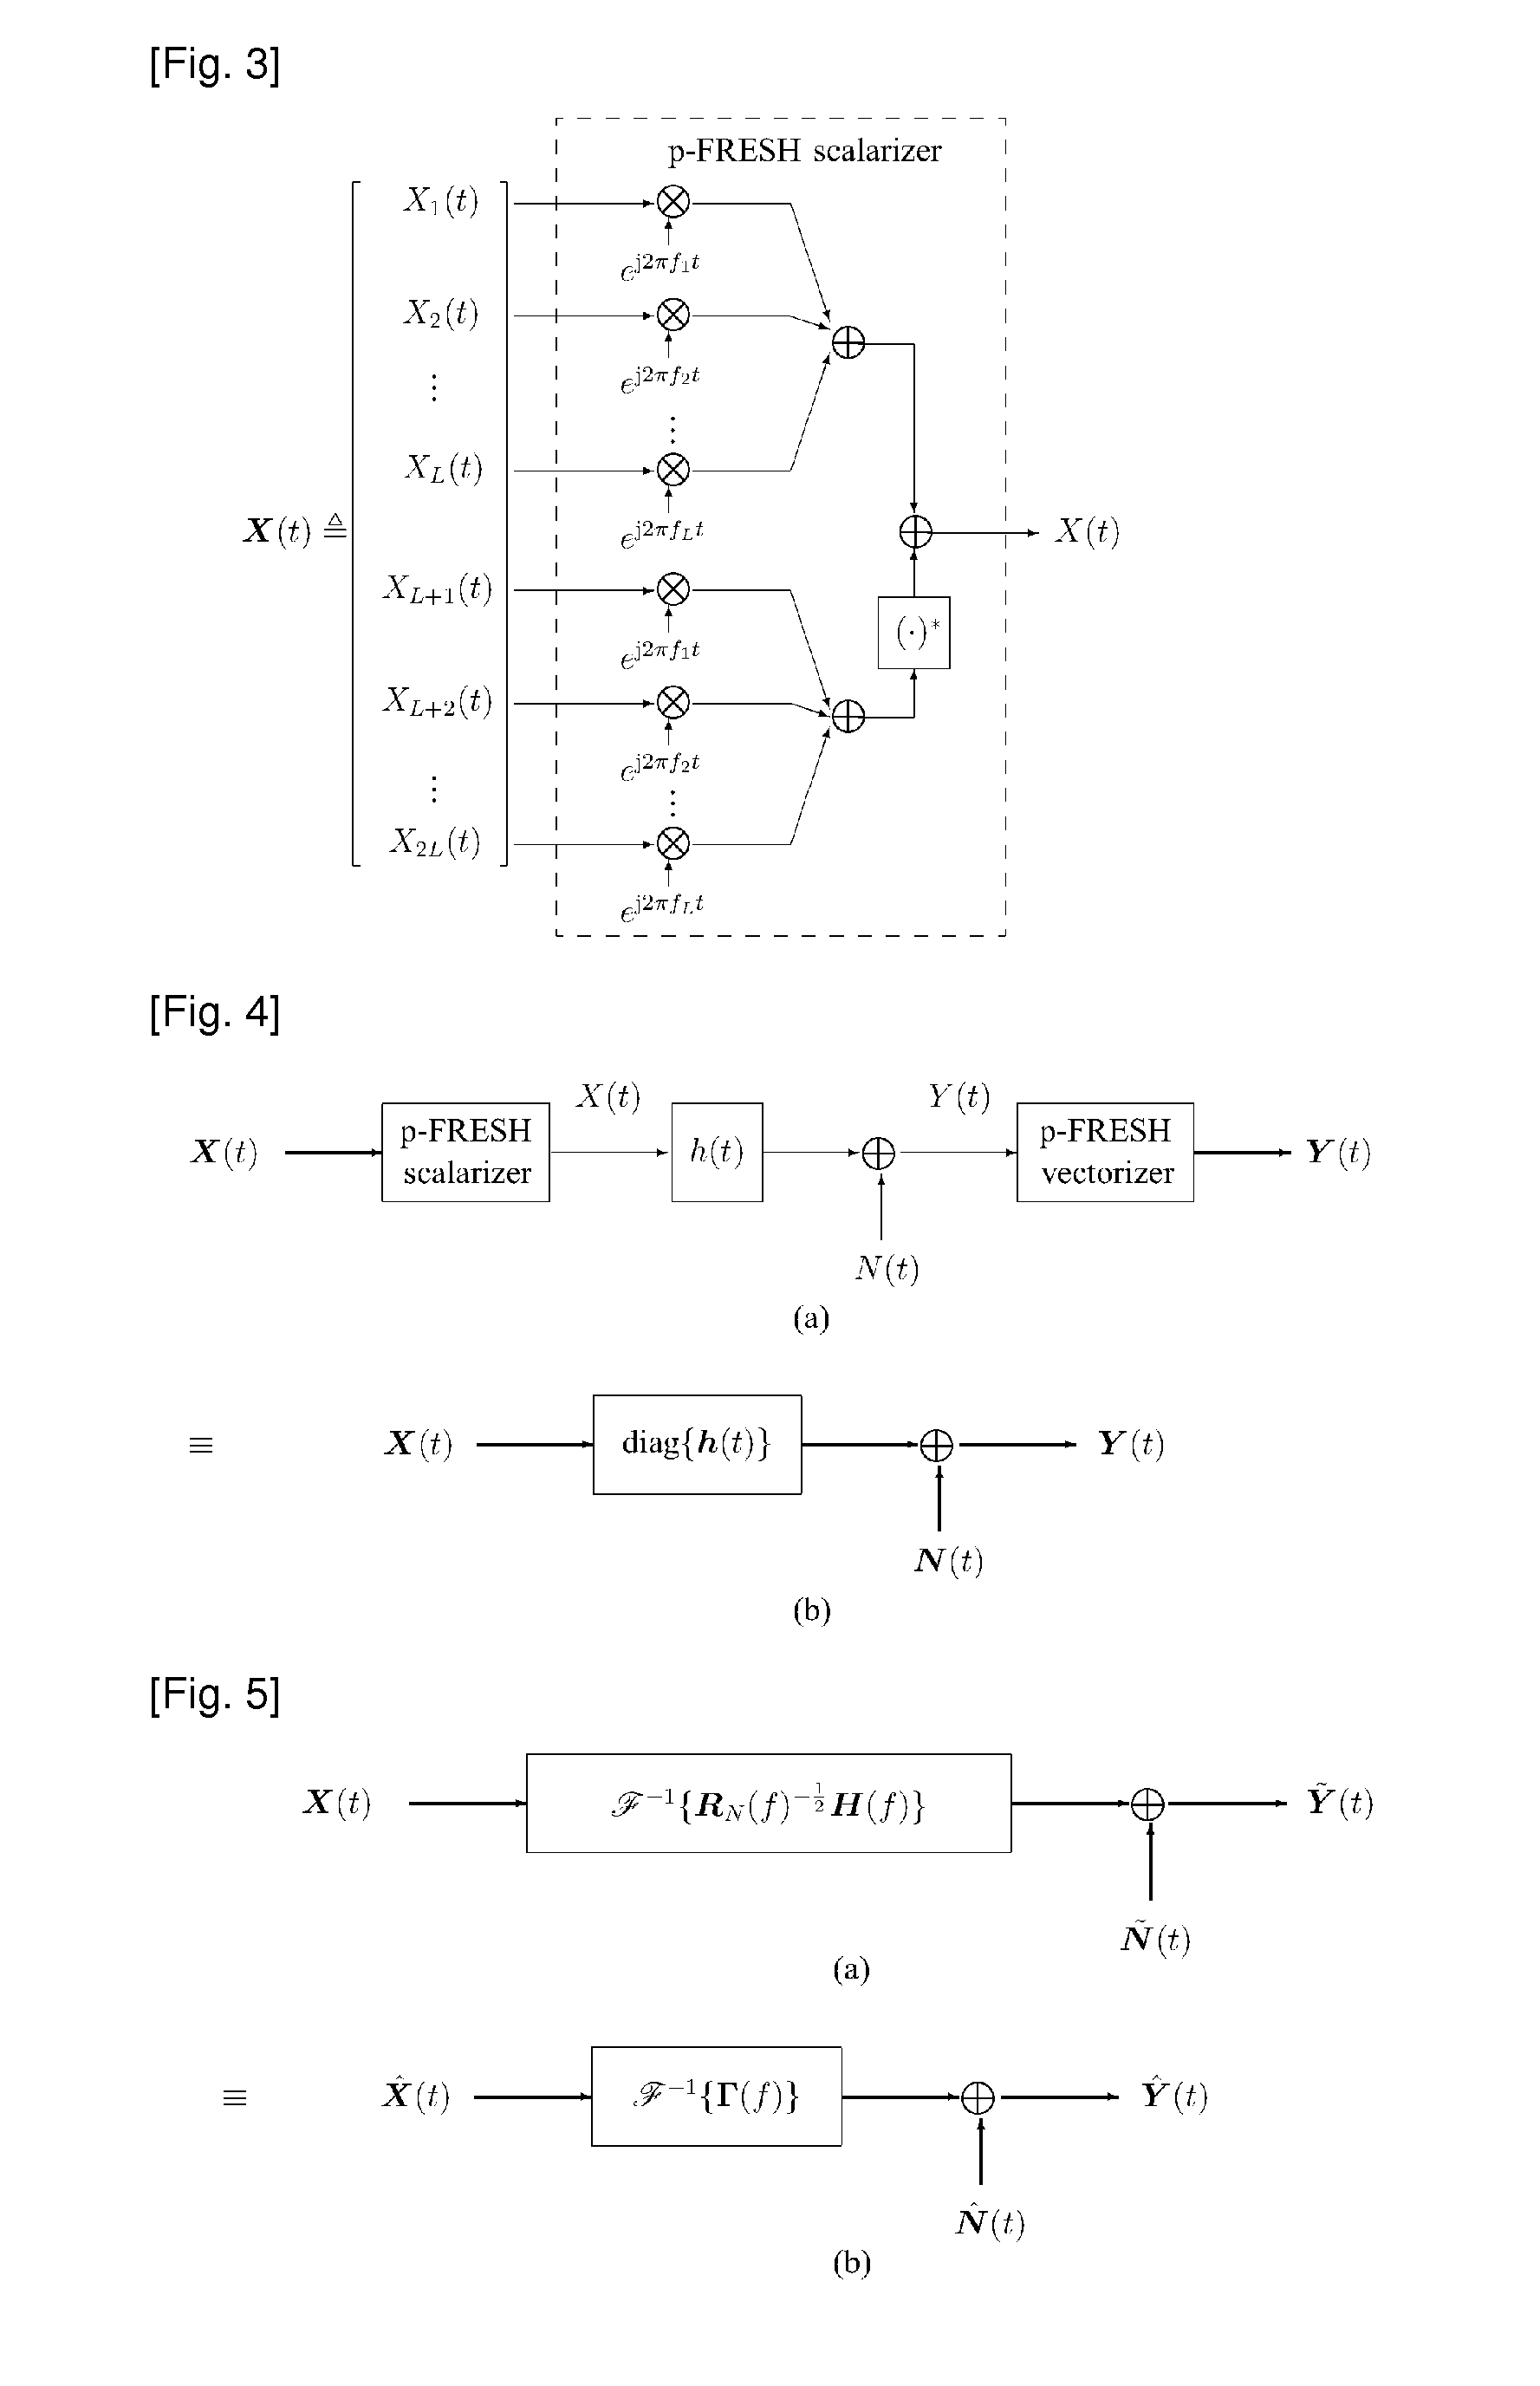 Apparatus and method for performing properrizing frequency shift(p-fresh) vectorizing